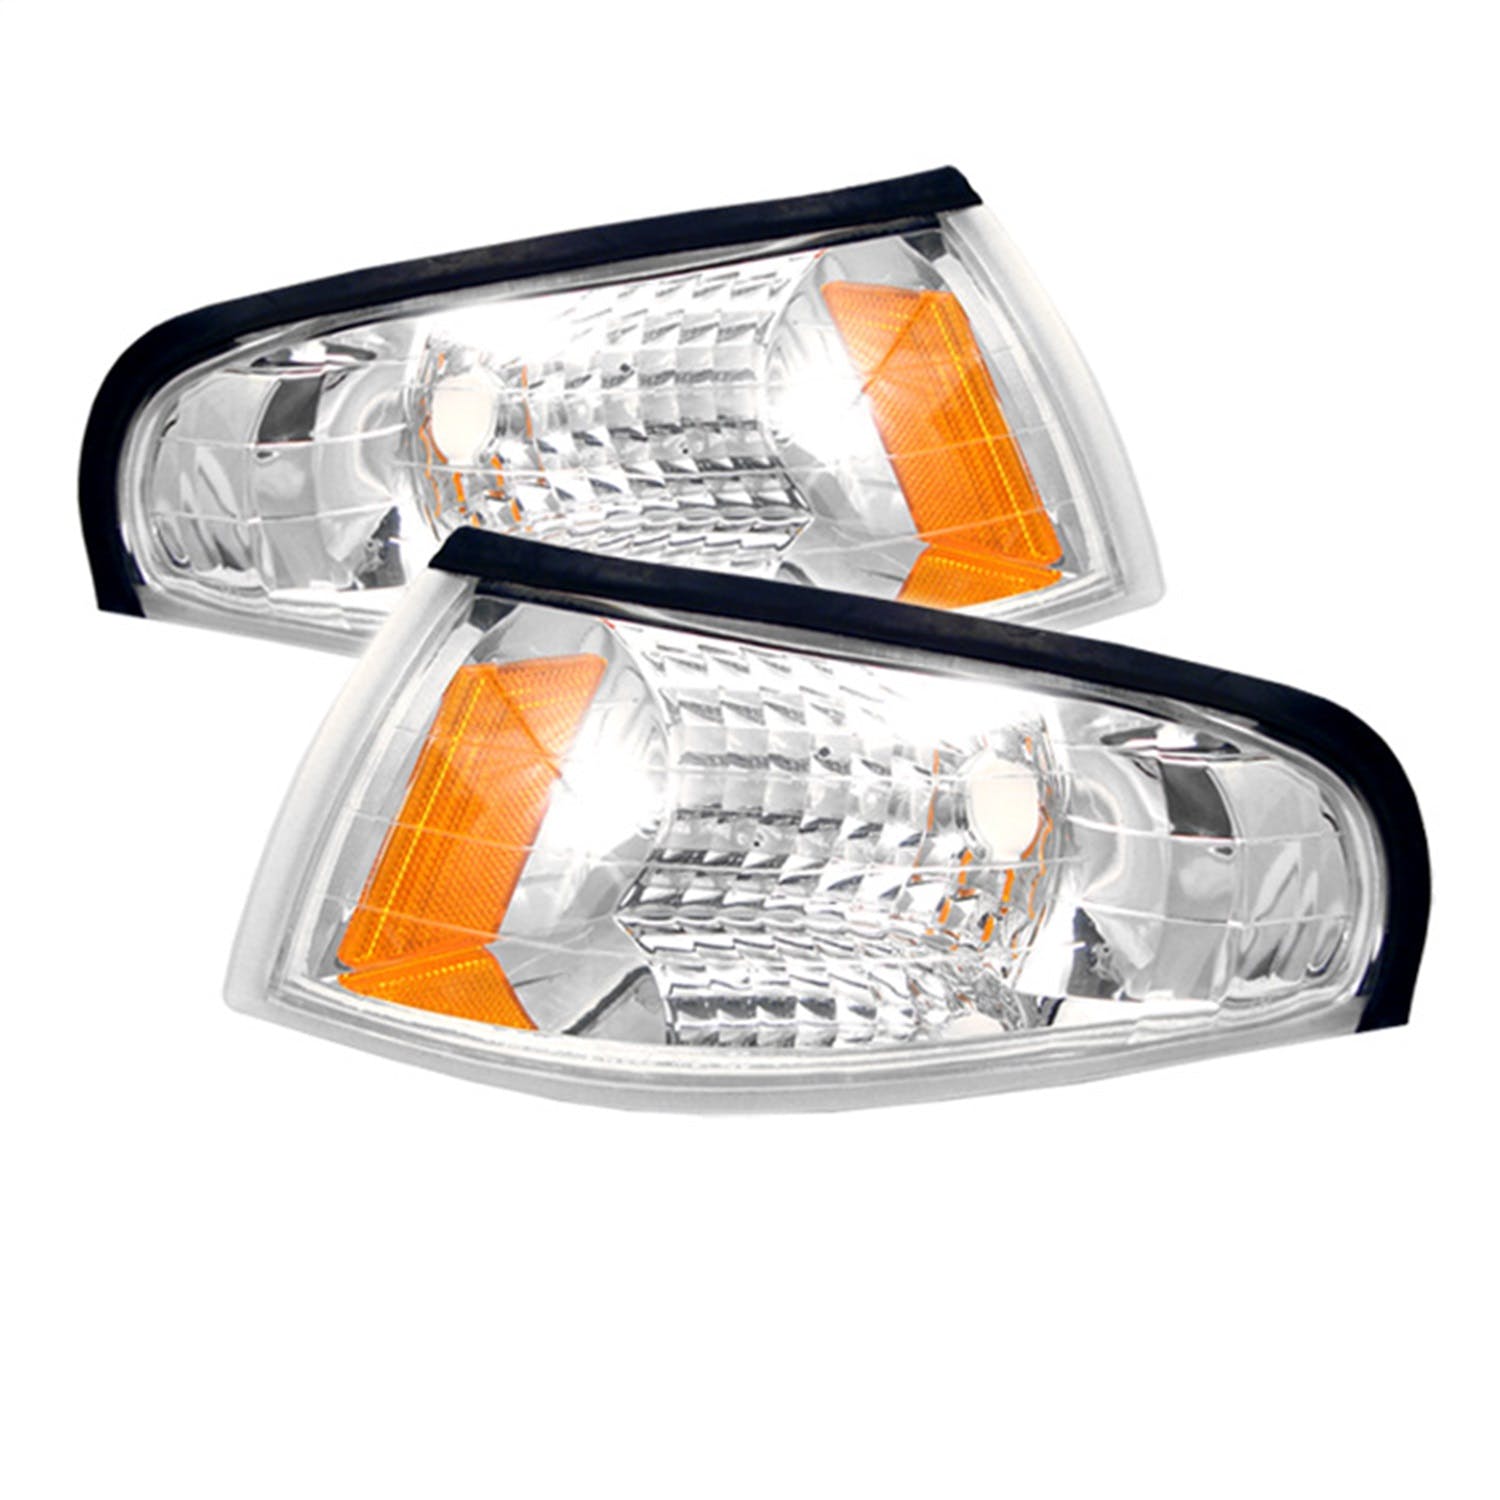 XTUNE POWER 5016119 Ford Mustang 94 98 Amber Corner Lights Euro